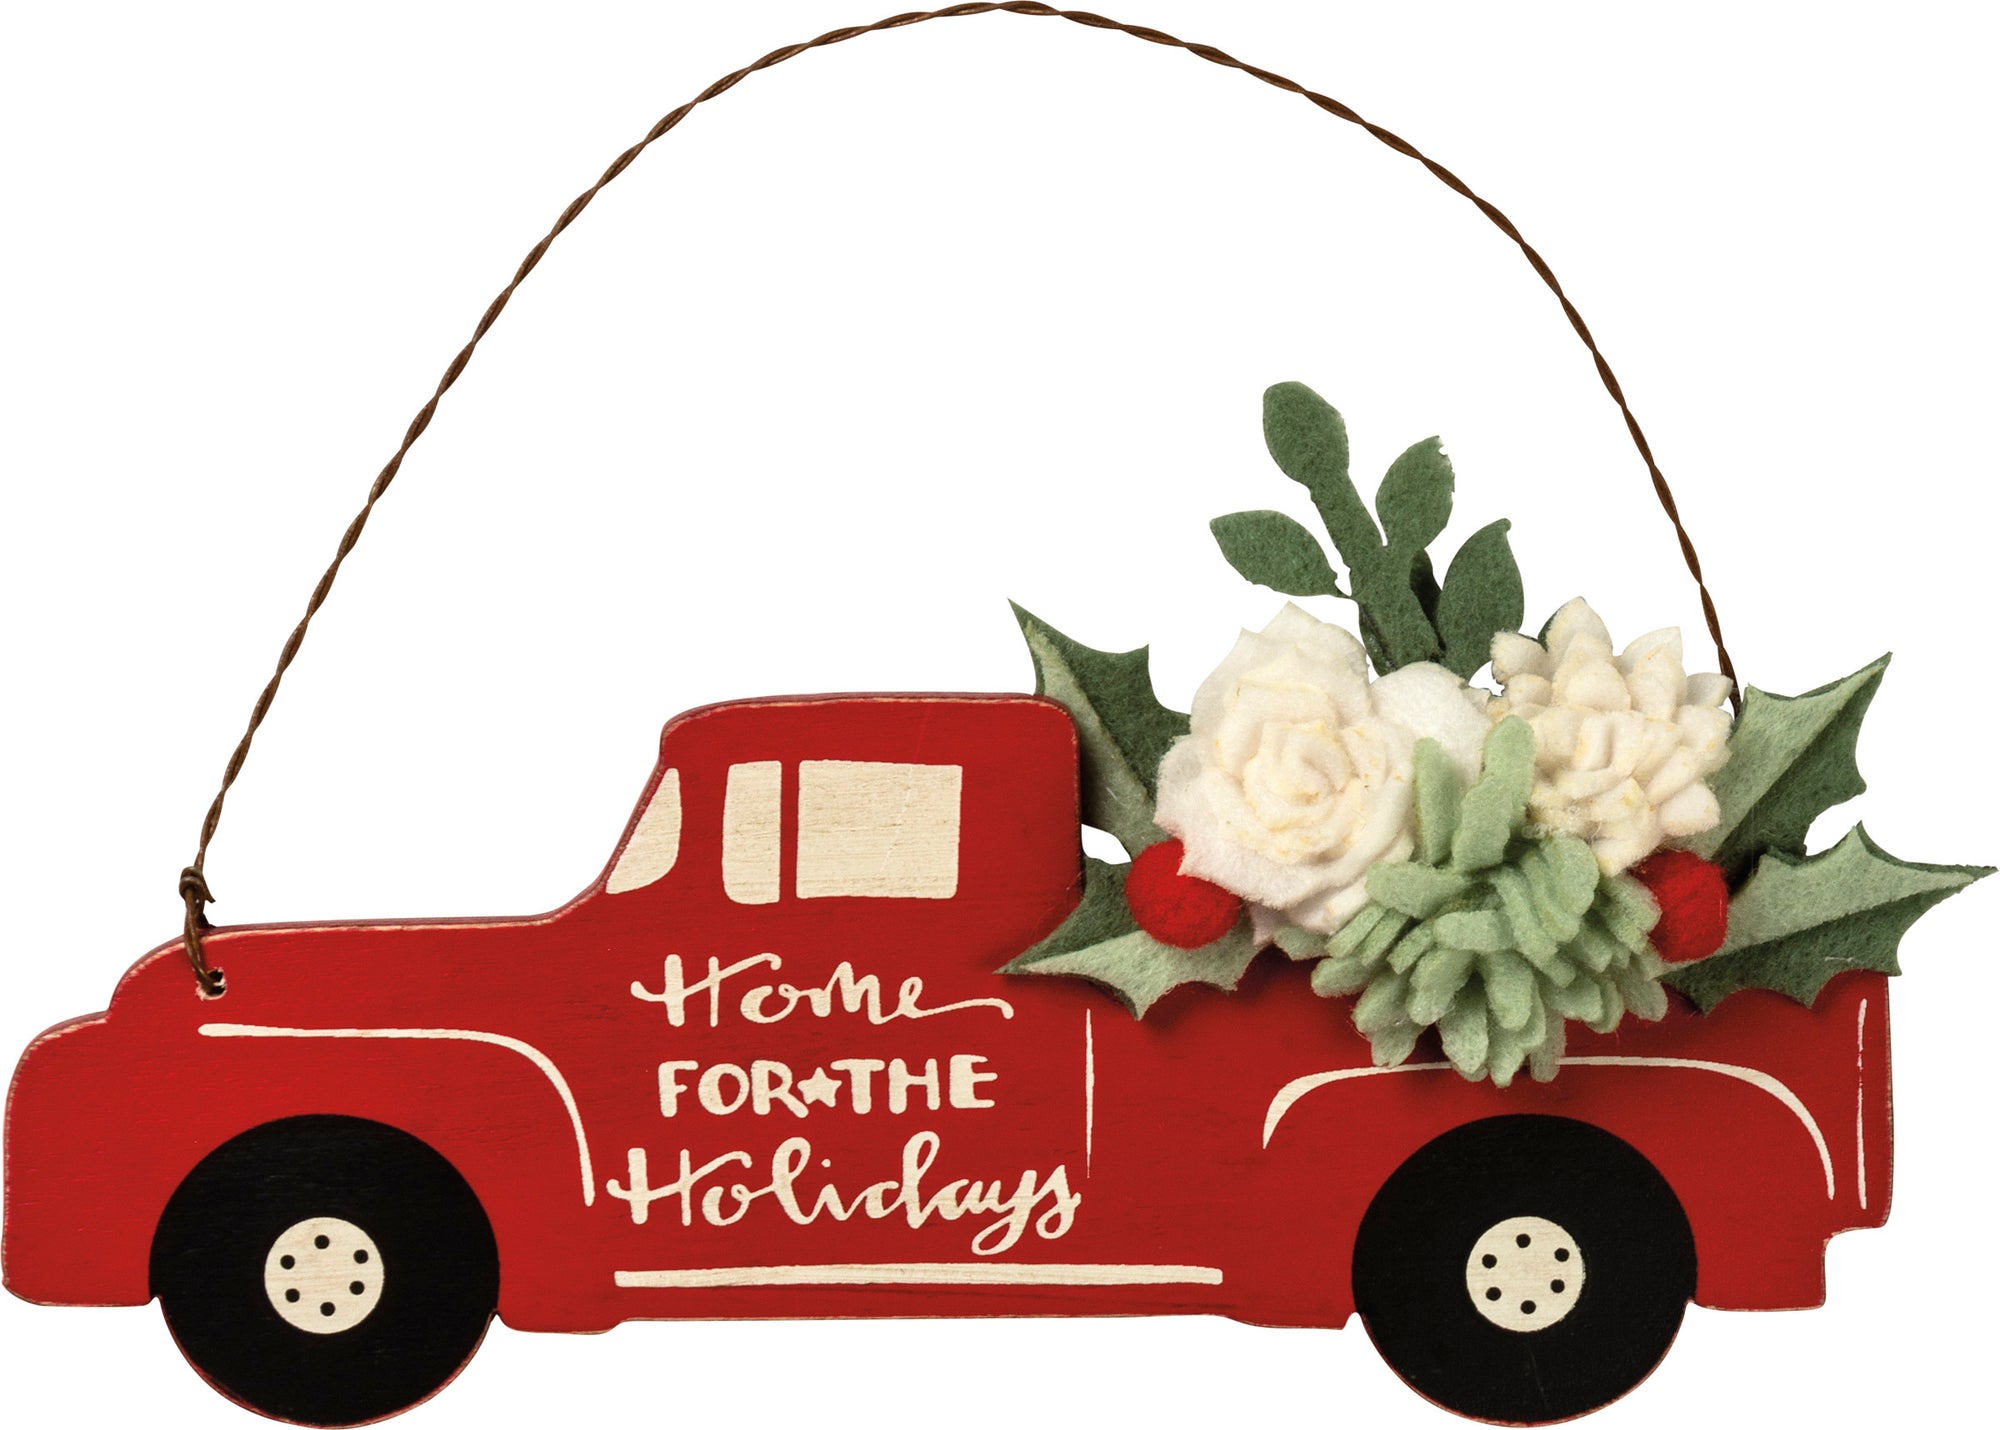 Home for the Holidays Red Truck Orn